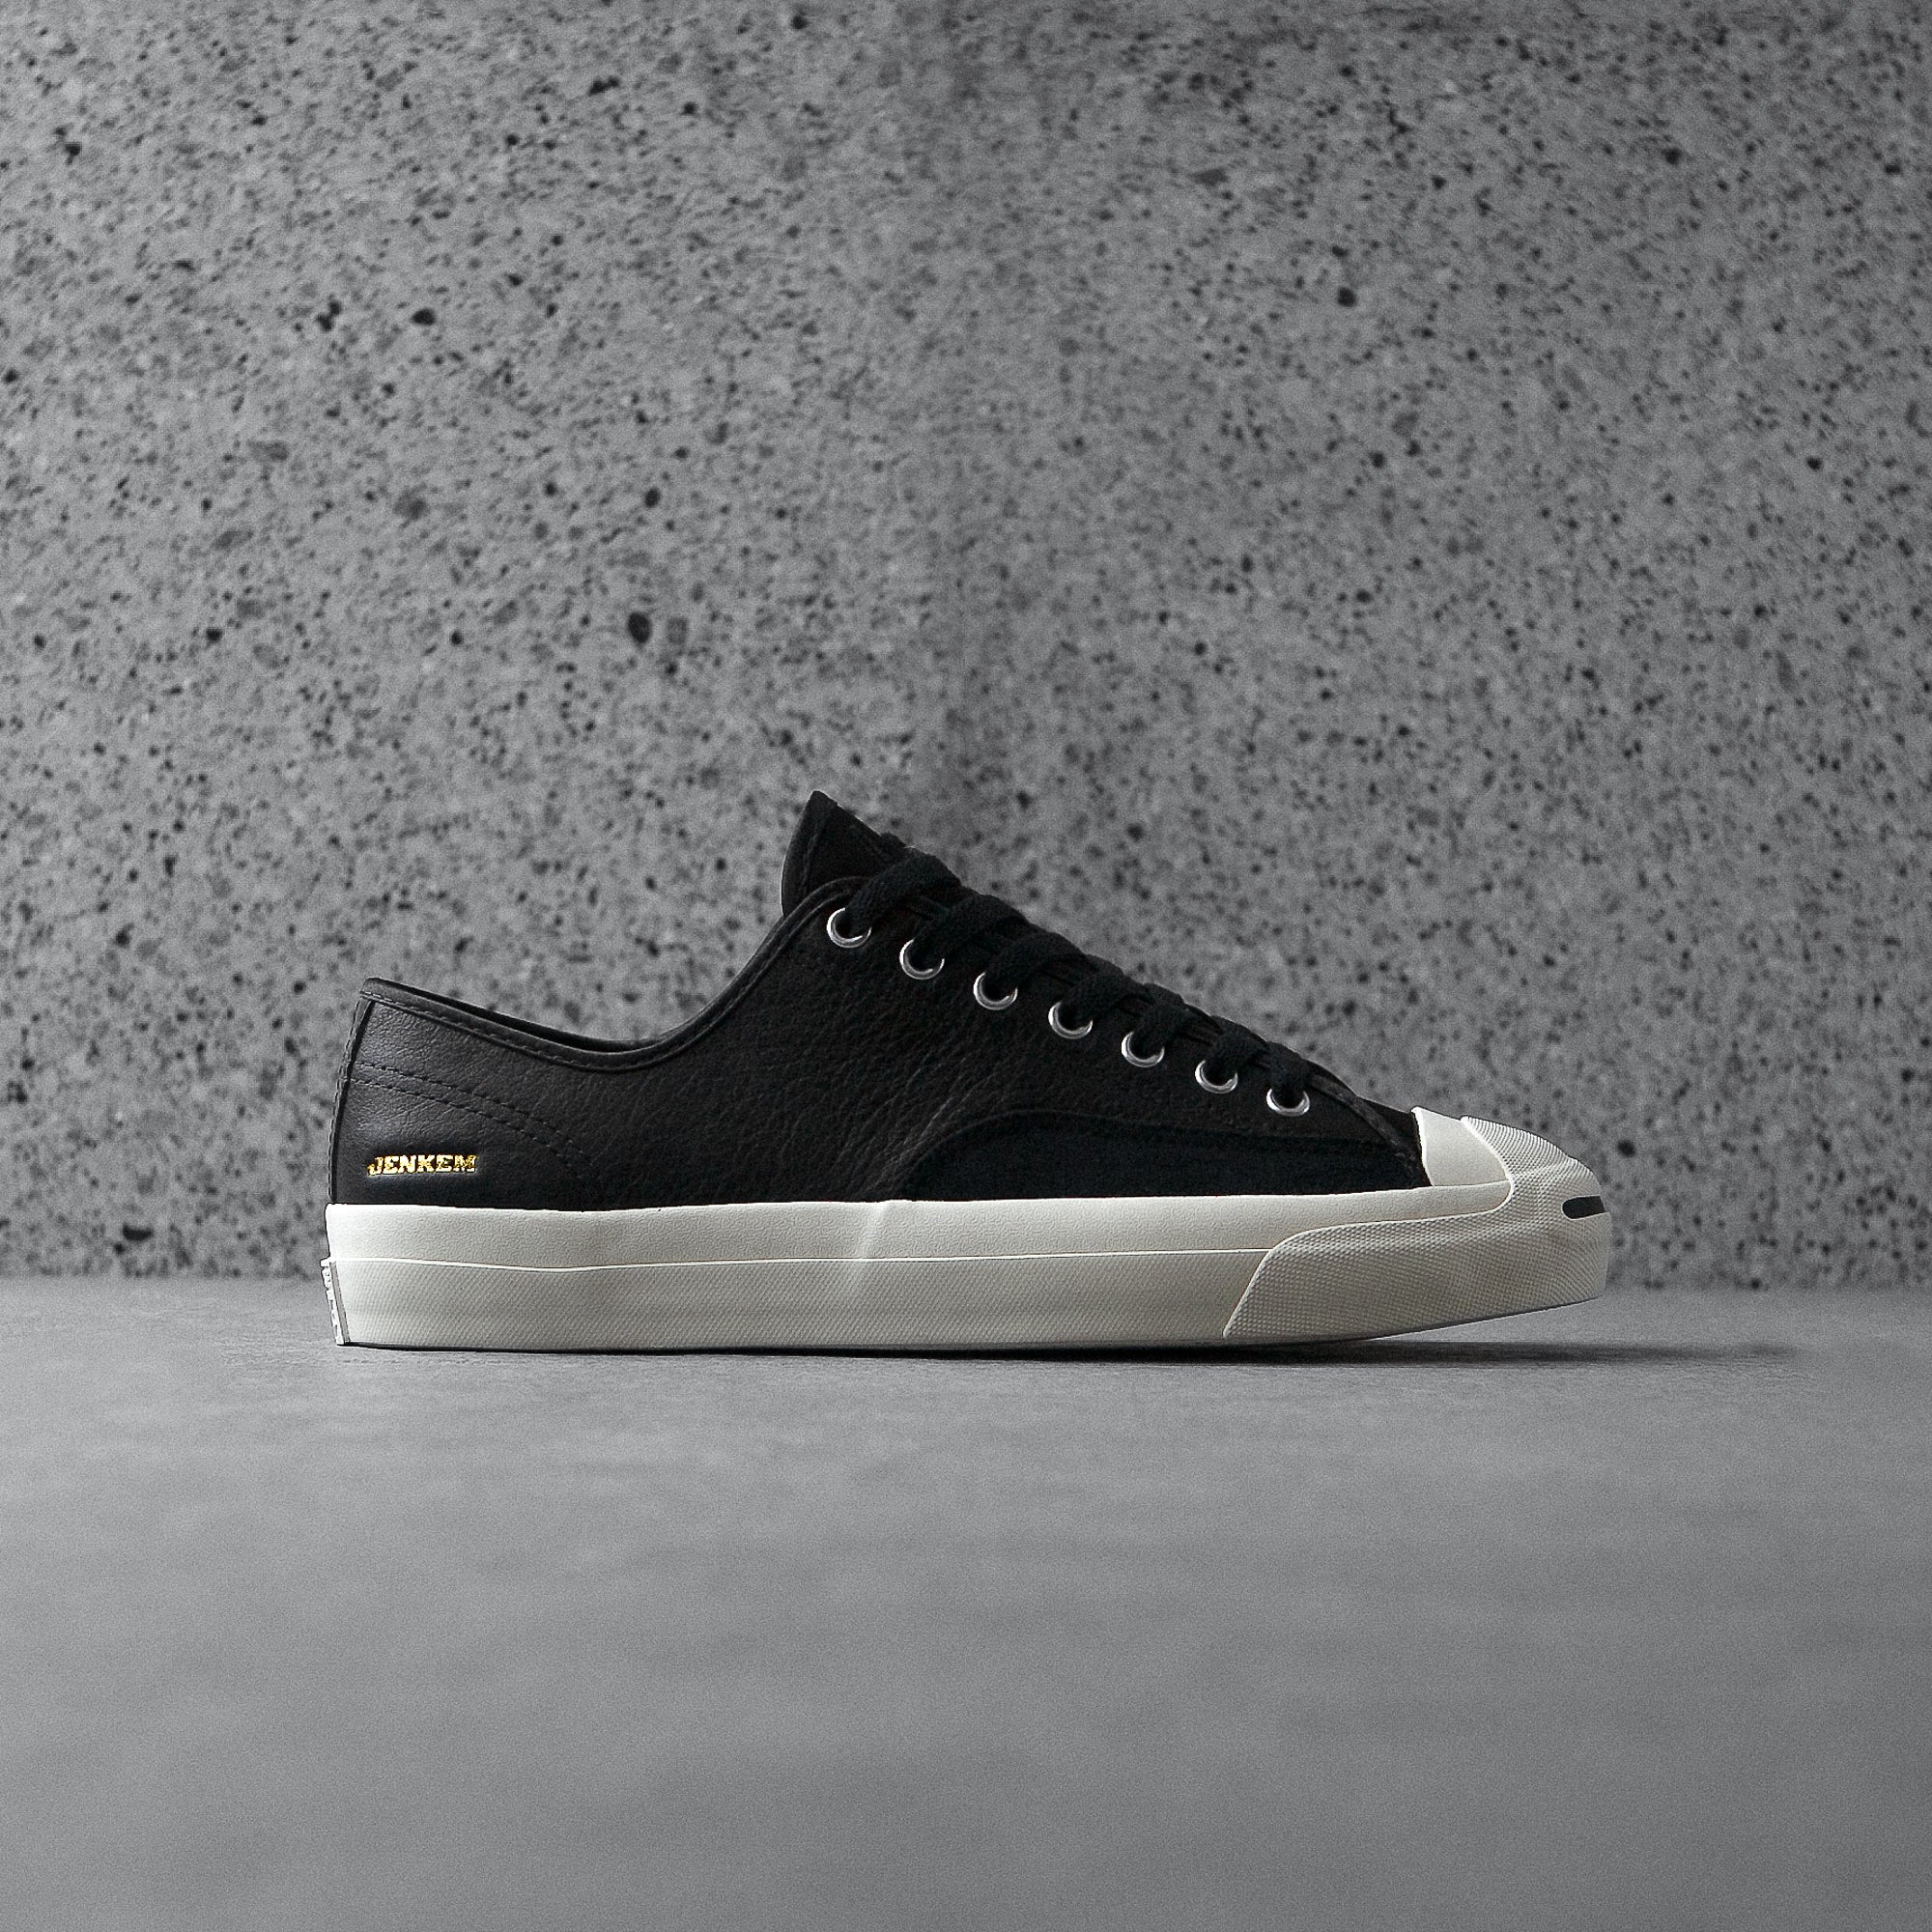 converse jack purcell x